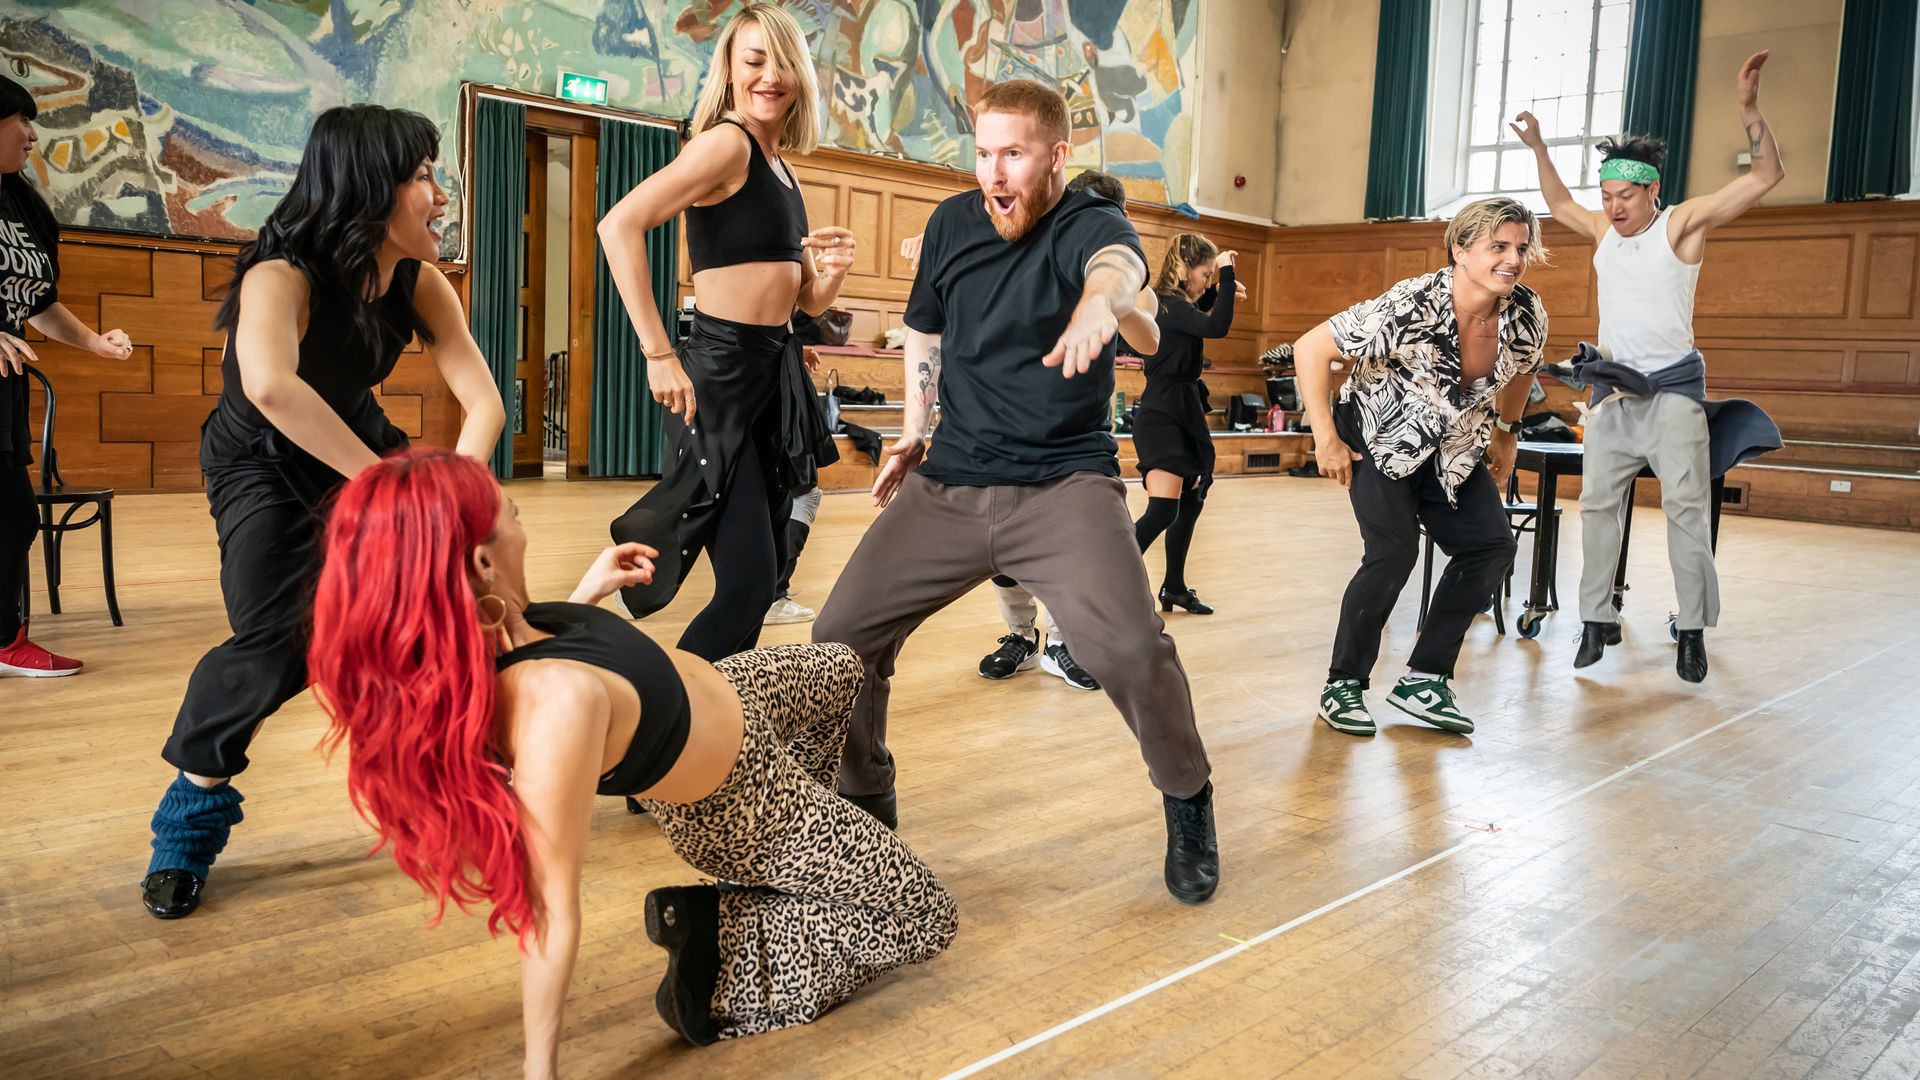 Dianne Buswell dances on the floor while Neil Jones gets his groove on during Strictly rehearsals